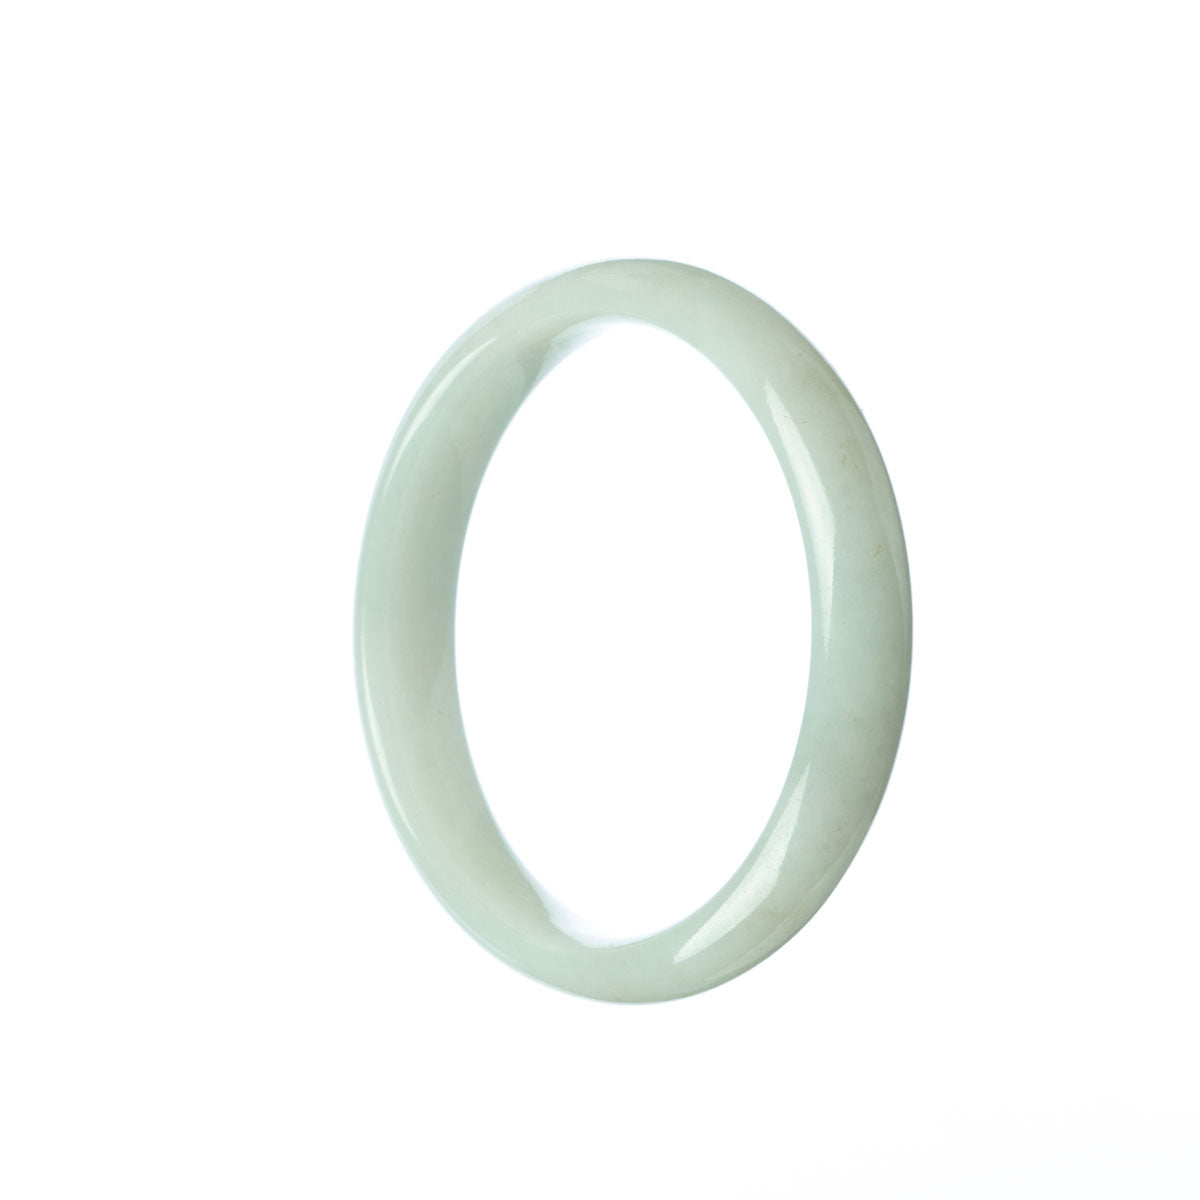 A high-quality pale green Burmese jade bangle in a half moon shape, measuring 54mm in diameter. Perfect for adding a touch of elegance to your jewelry collection.